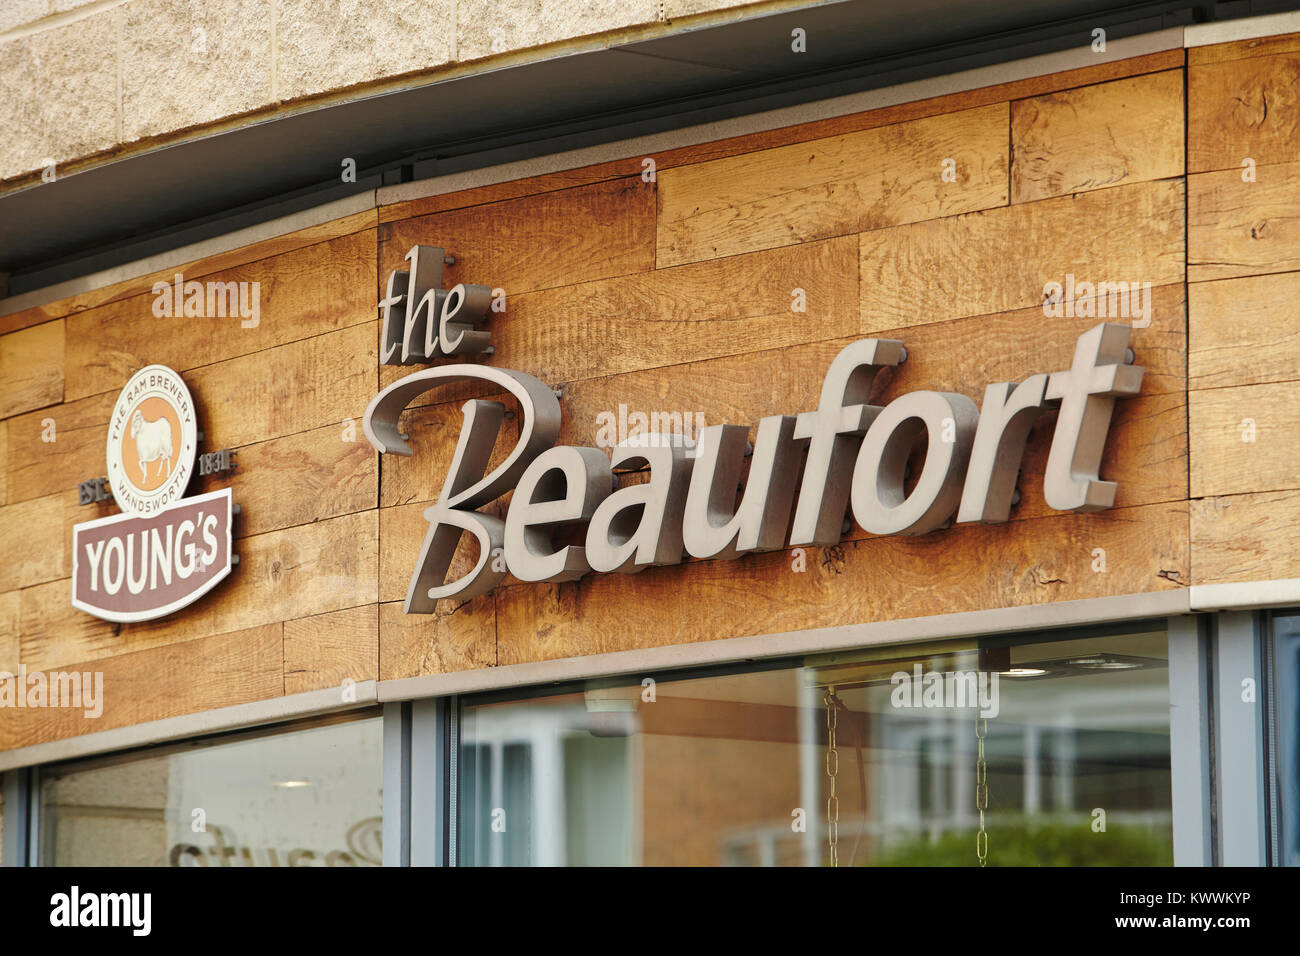 The Beaufort pub and restaurant in Colindale, North London, England Stock Photo